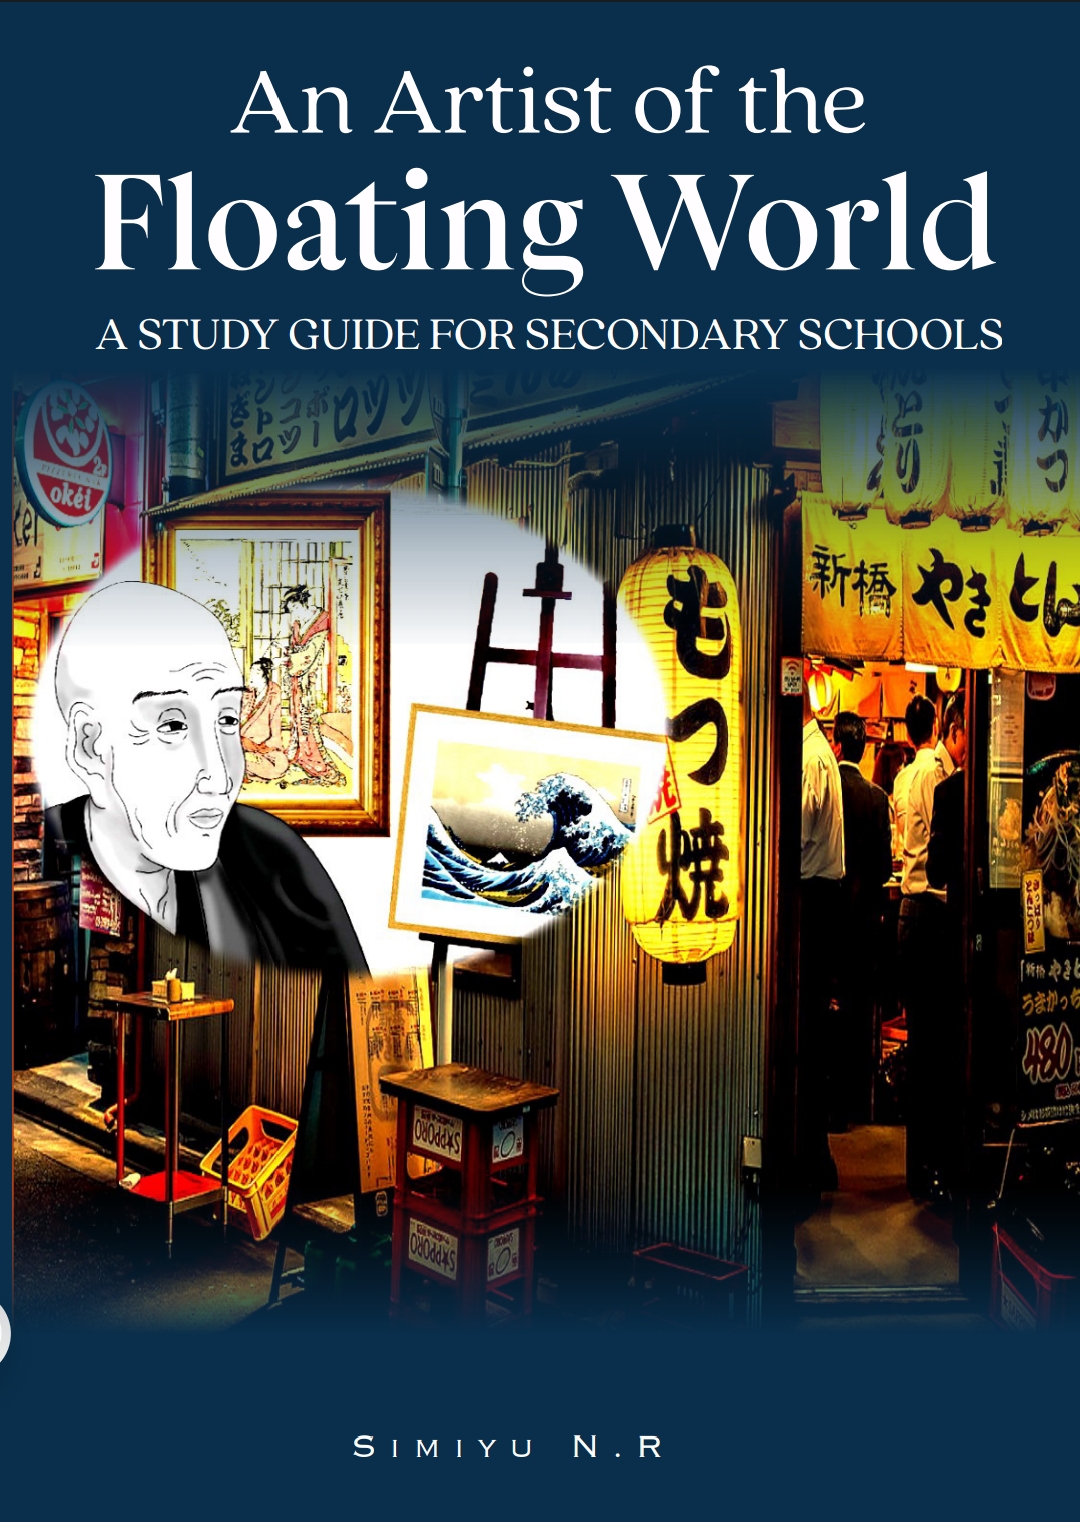 artist of floating world essay questions